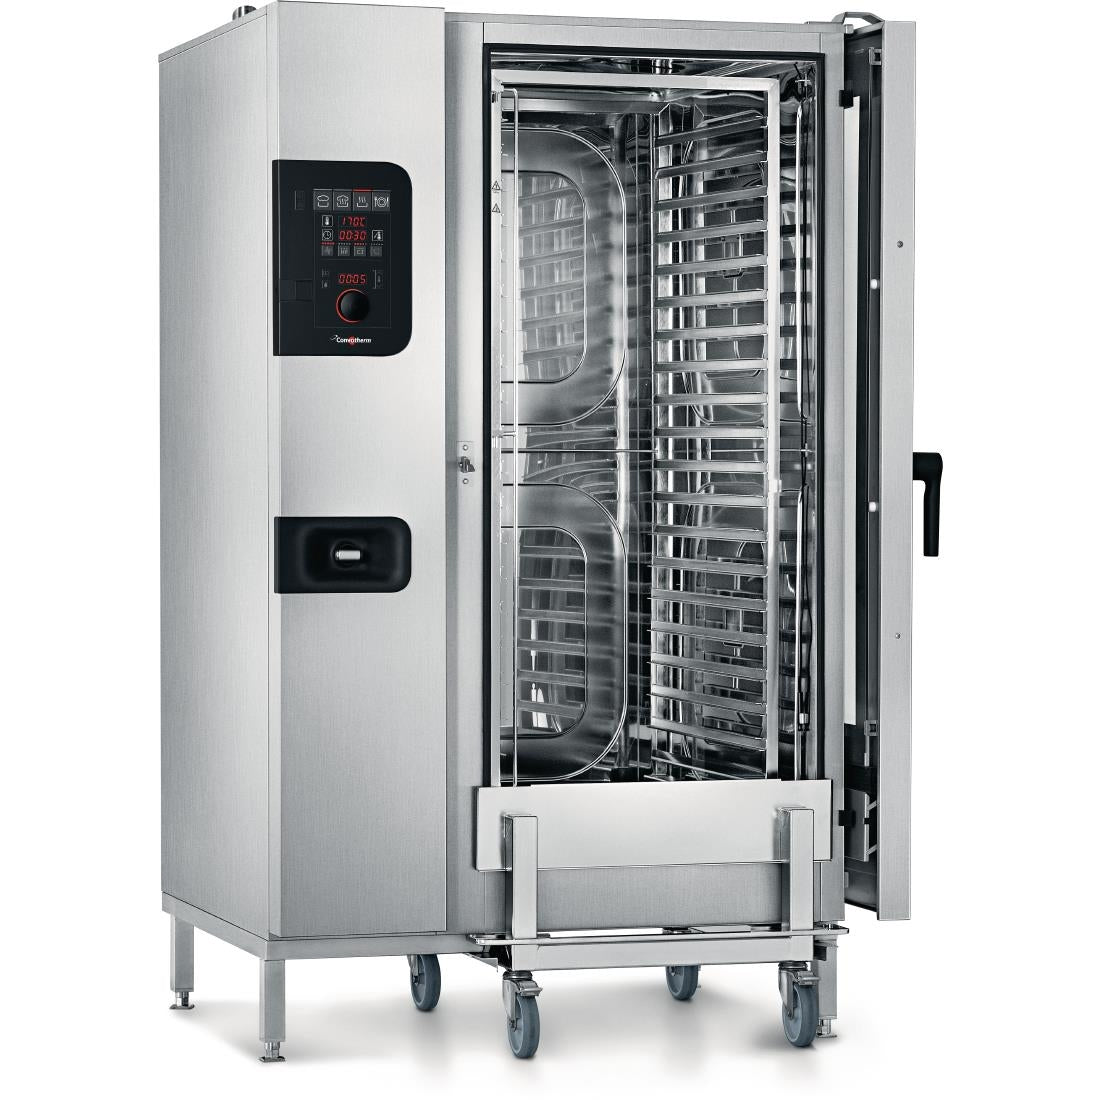 DR445-MO Convotherm 4 easyDial Combi Oven 20 x 2 x1 GN Grid JD Catering Equipment Solutions Ltd